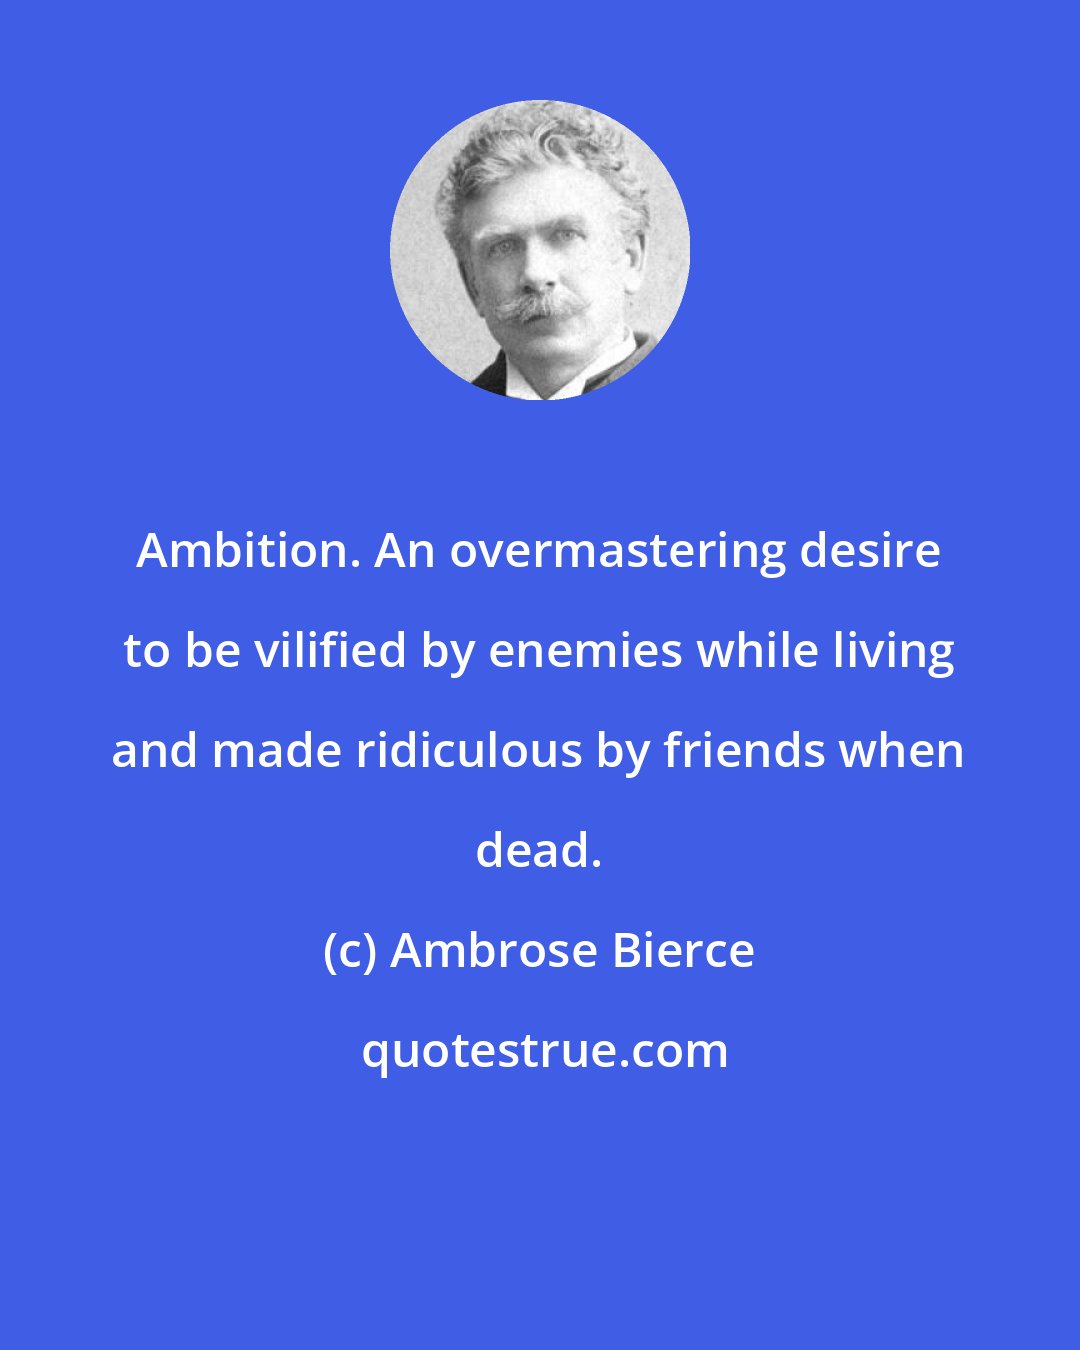 Ambrose Bierce: Ambition. An overmastering desire to be vilified by enemies while living and made ridiculous by friends when dead.